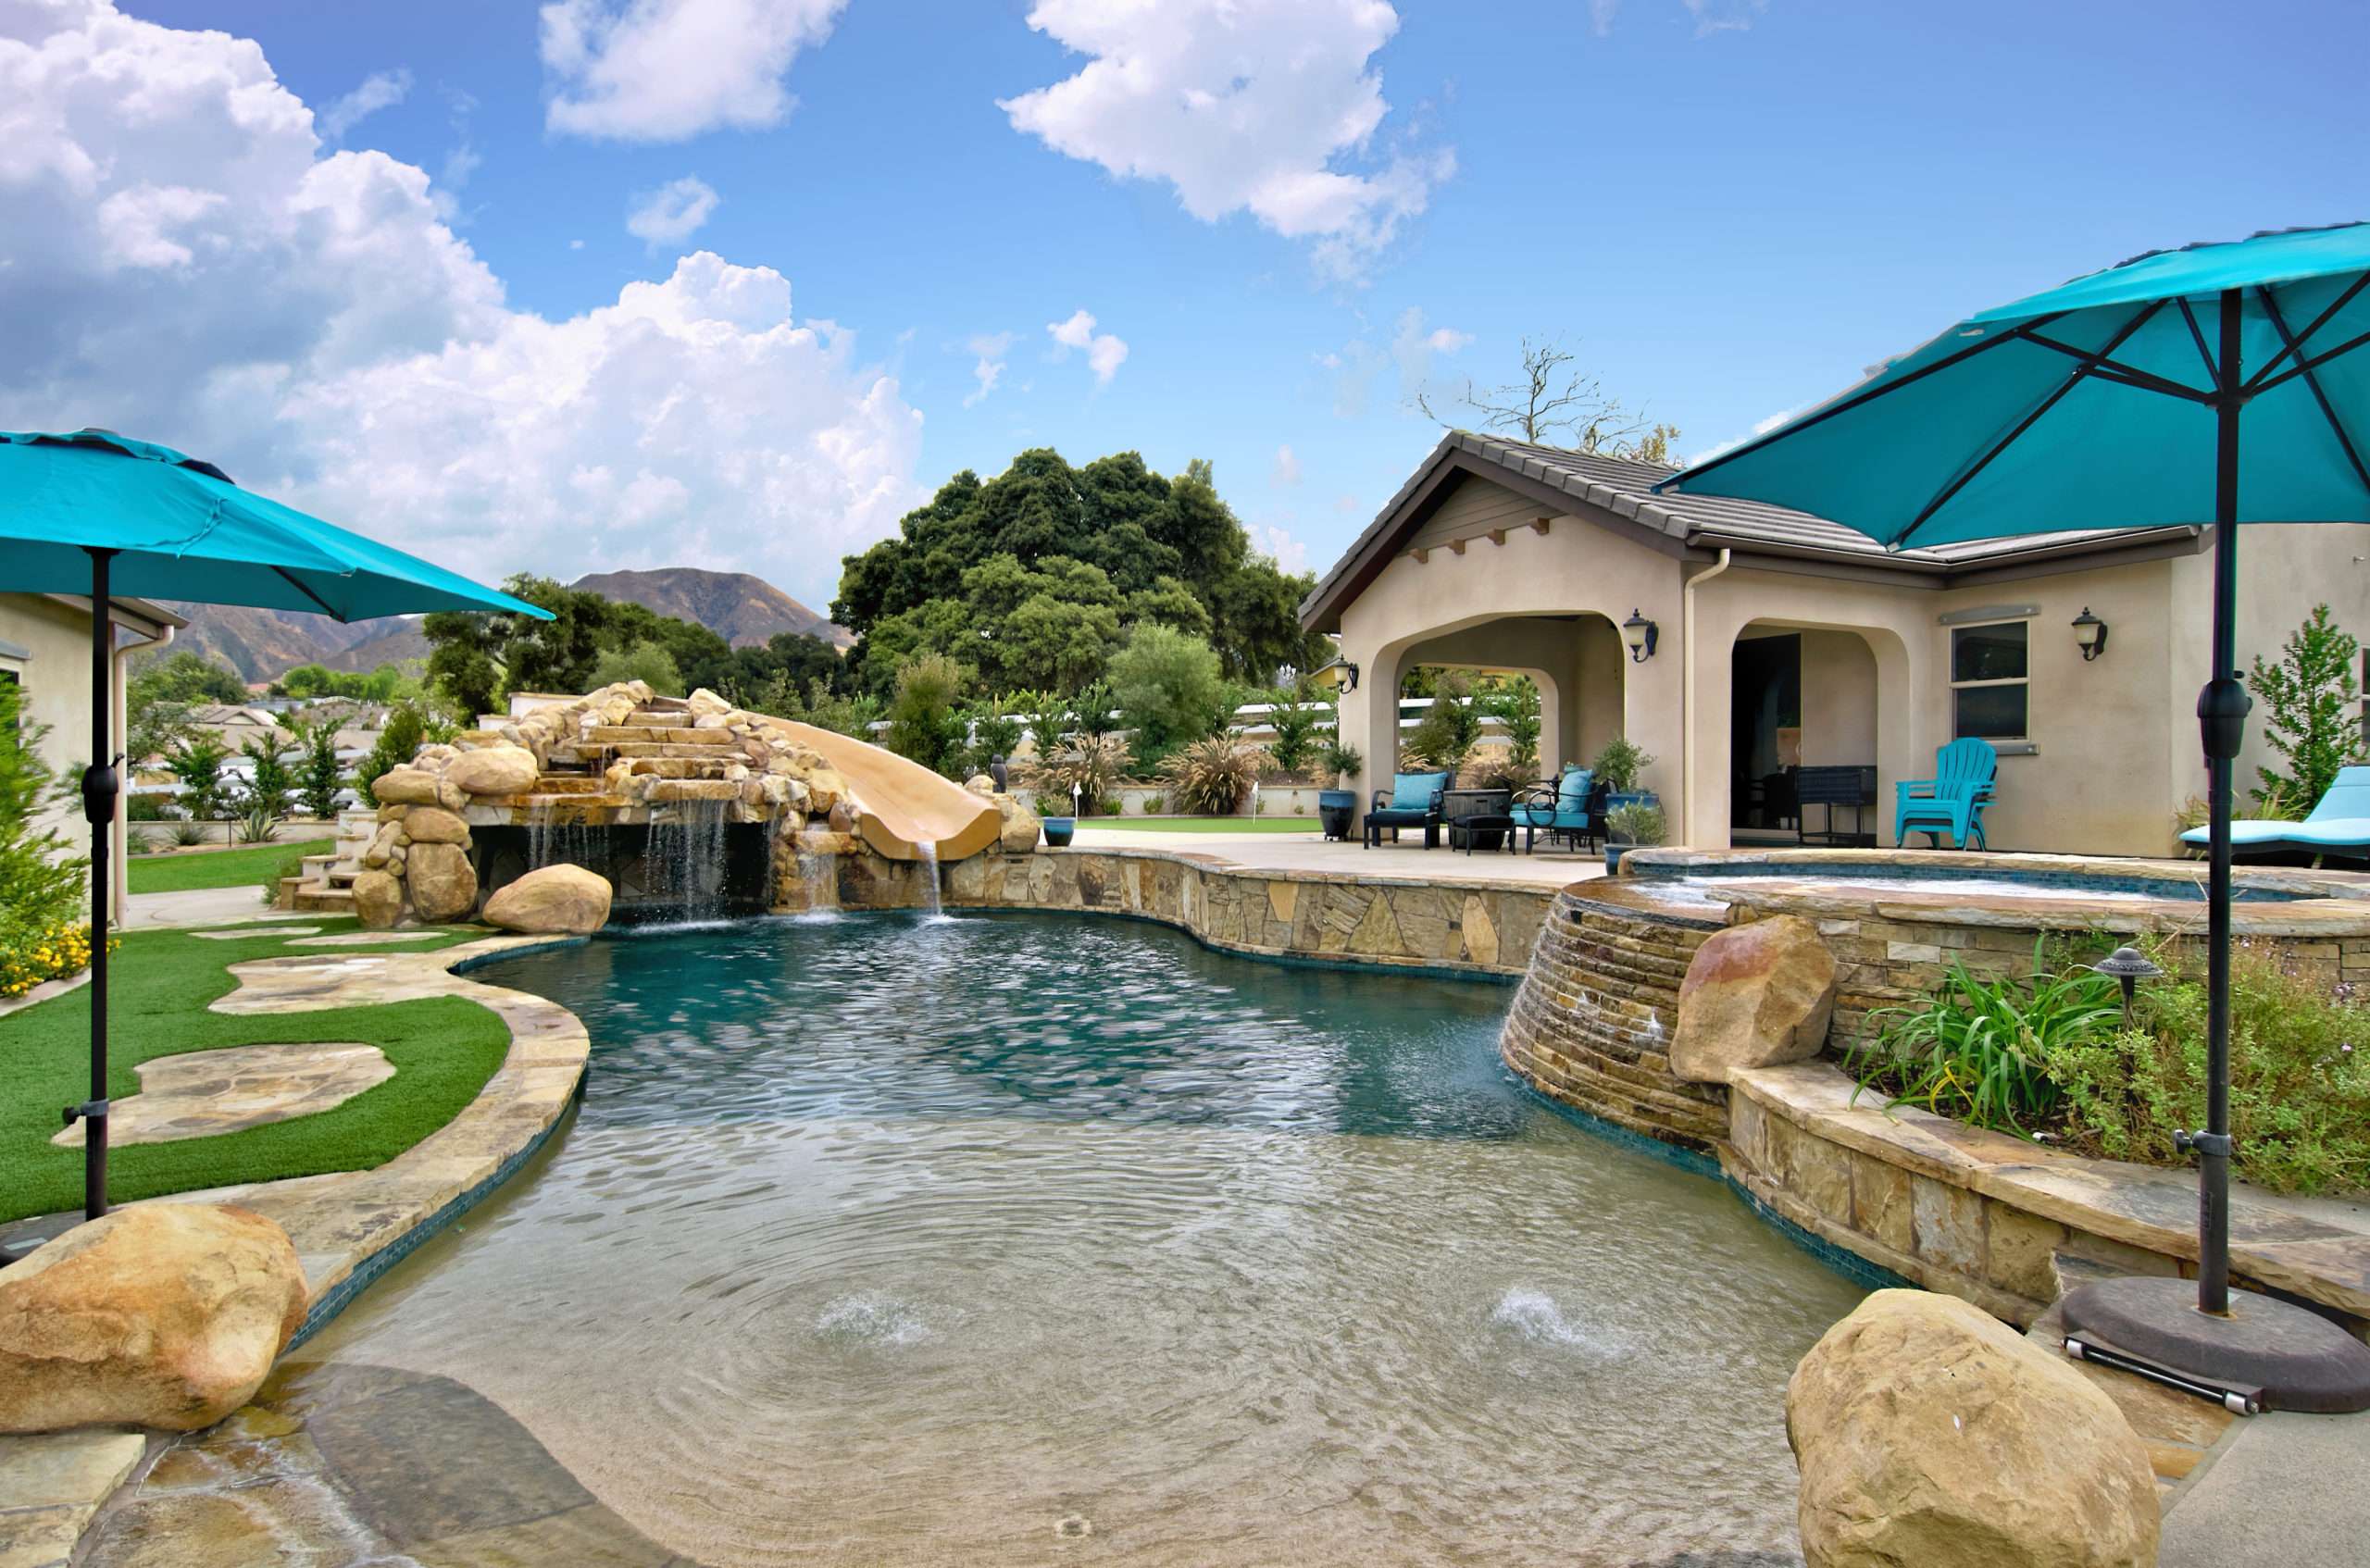 How Much Does It Cost to Build a Pool? 6 Factors to Consider